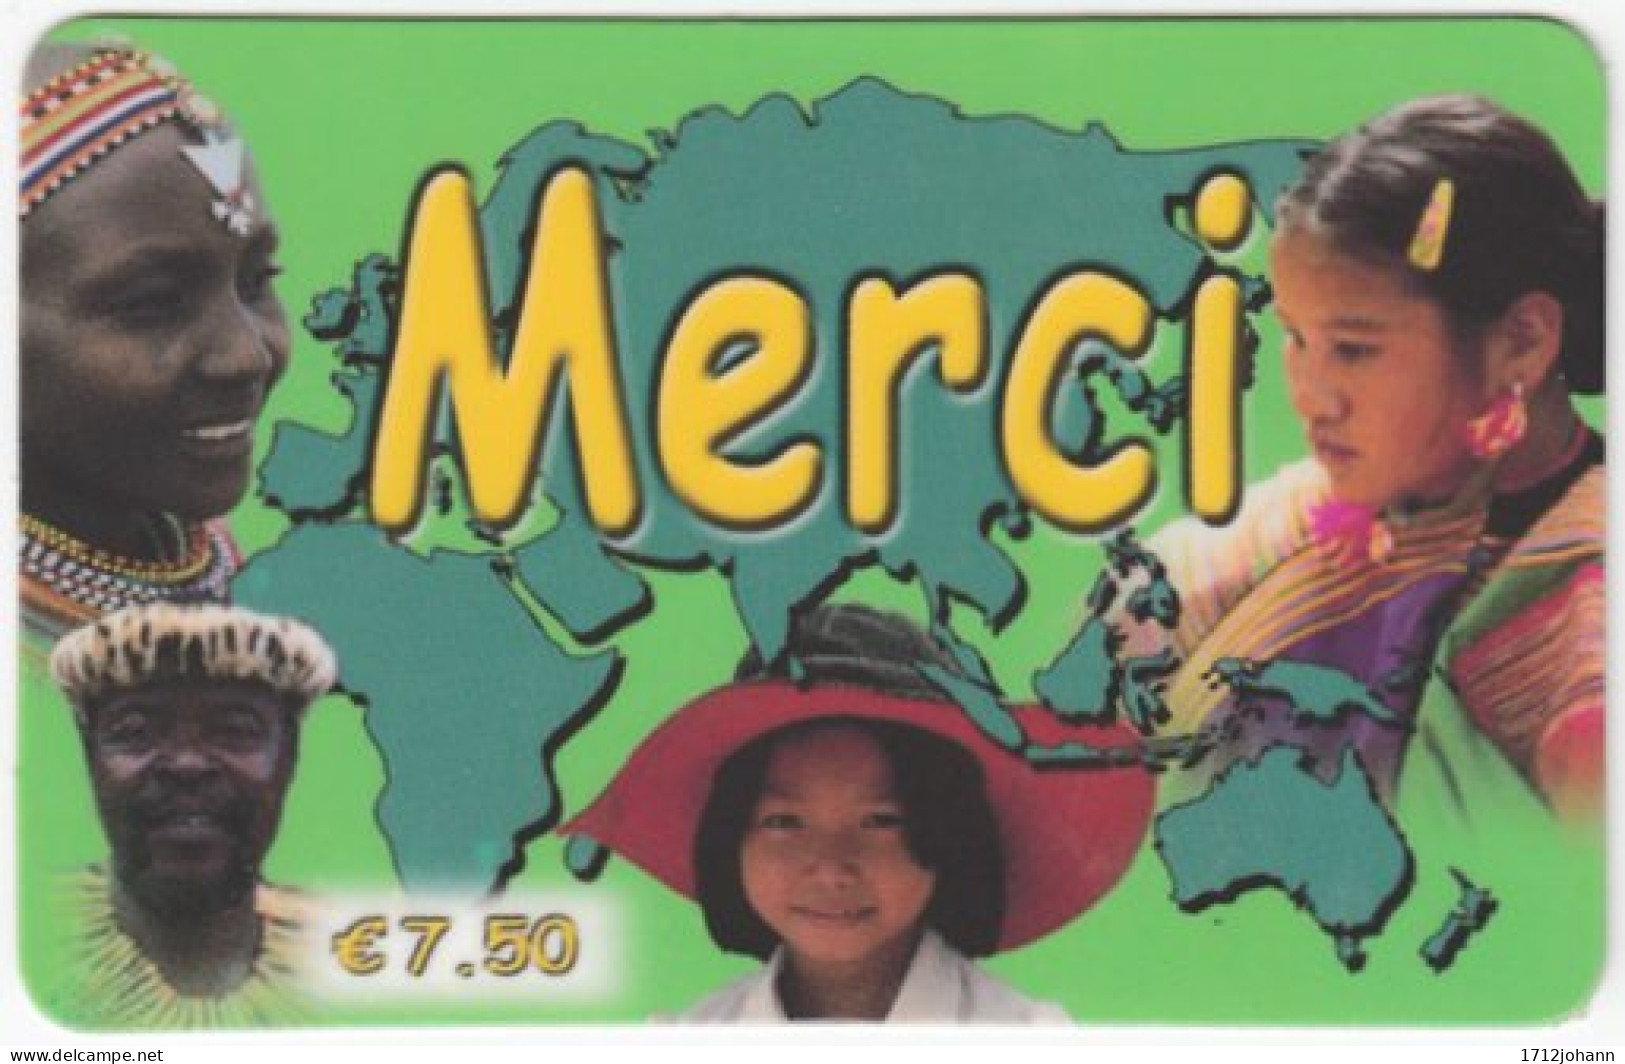 FRANCE C-411 Prepaid Merci - Map, World, People - Used - Cellphone Cards (refills)